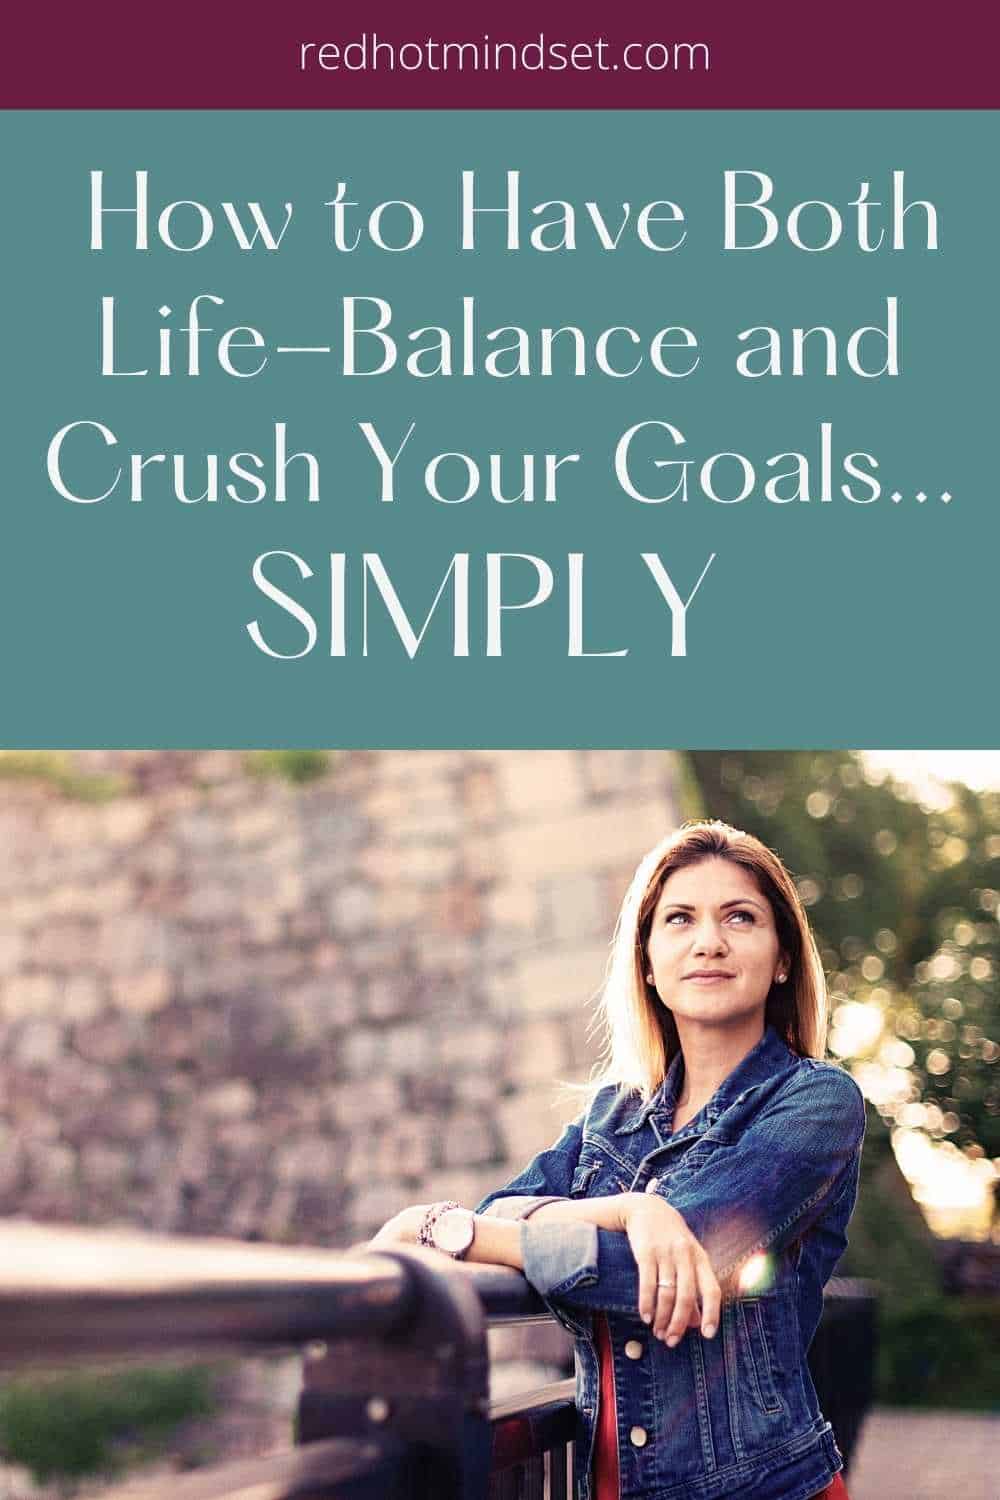 Pinterest image of a woman standing on a bridge with her arms on the ledge looking out into the distance motivated, with a title saying how to have both life-balance and crush your goals...simply